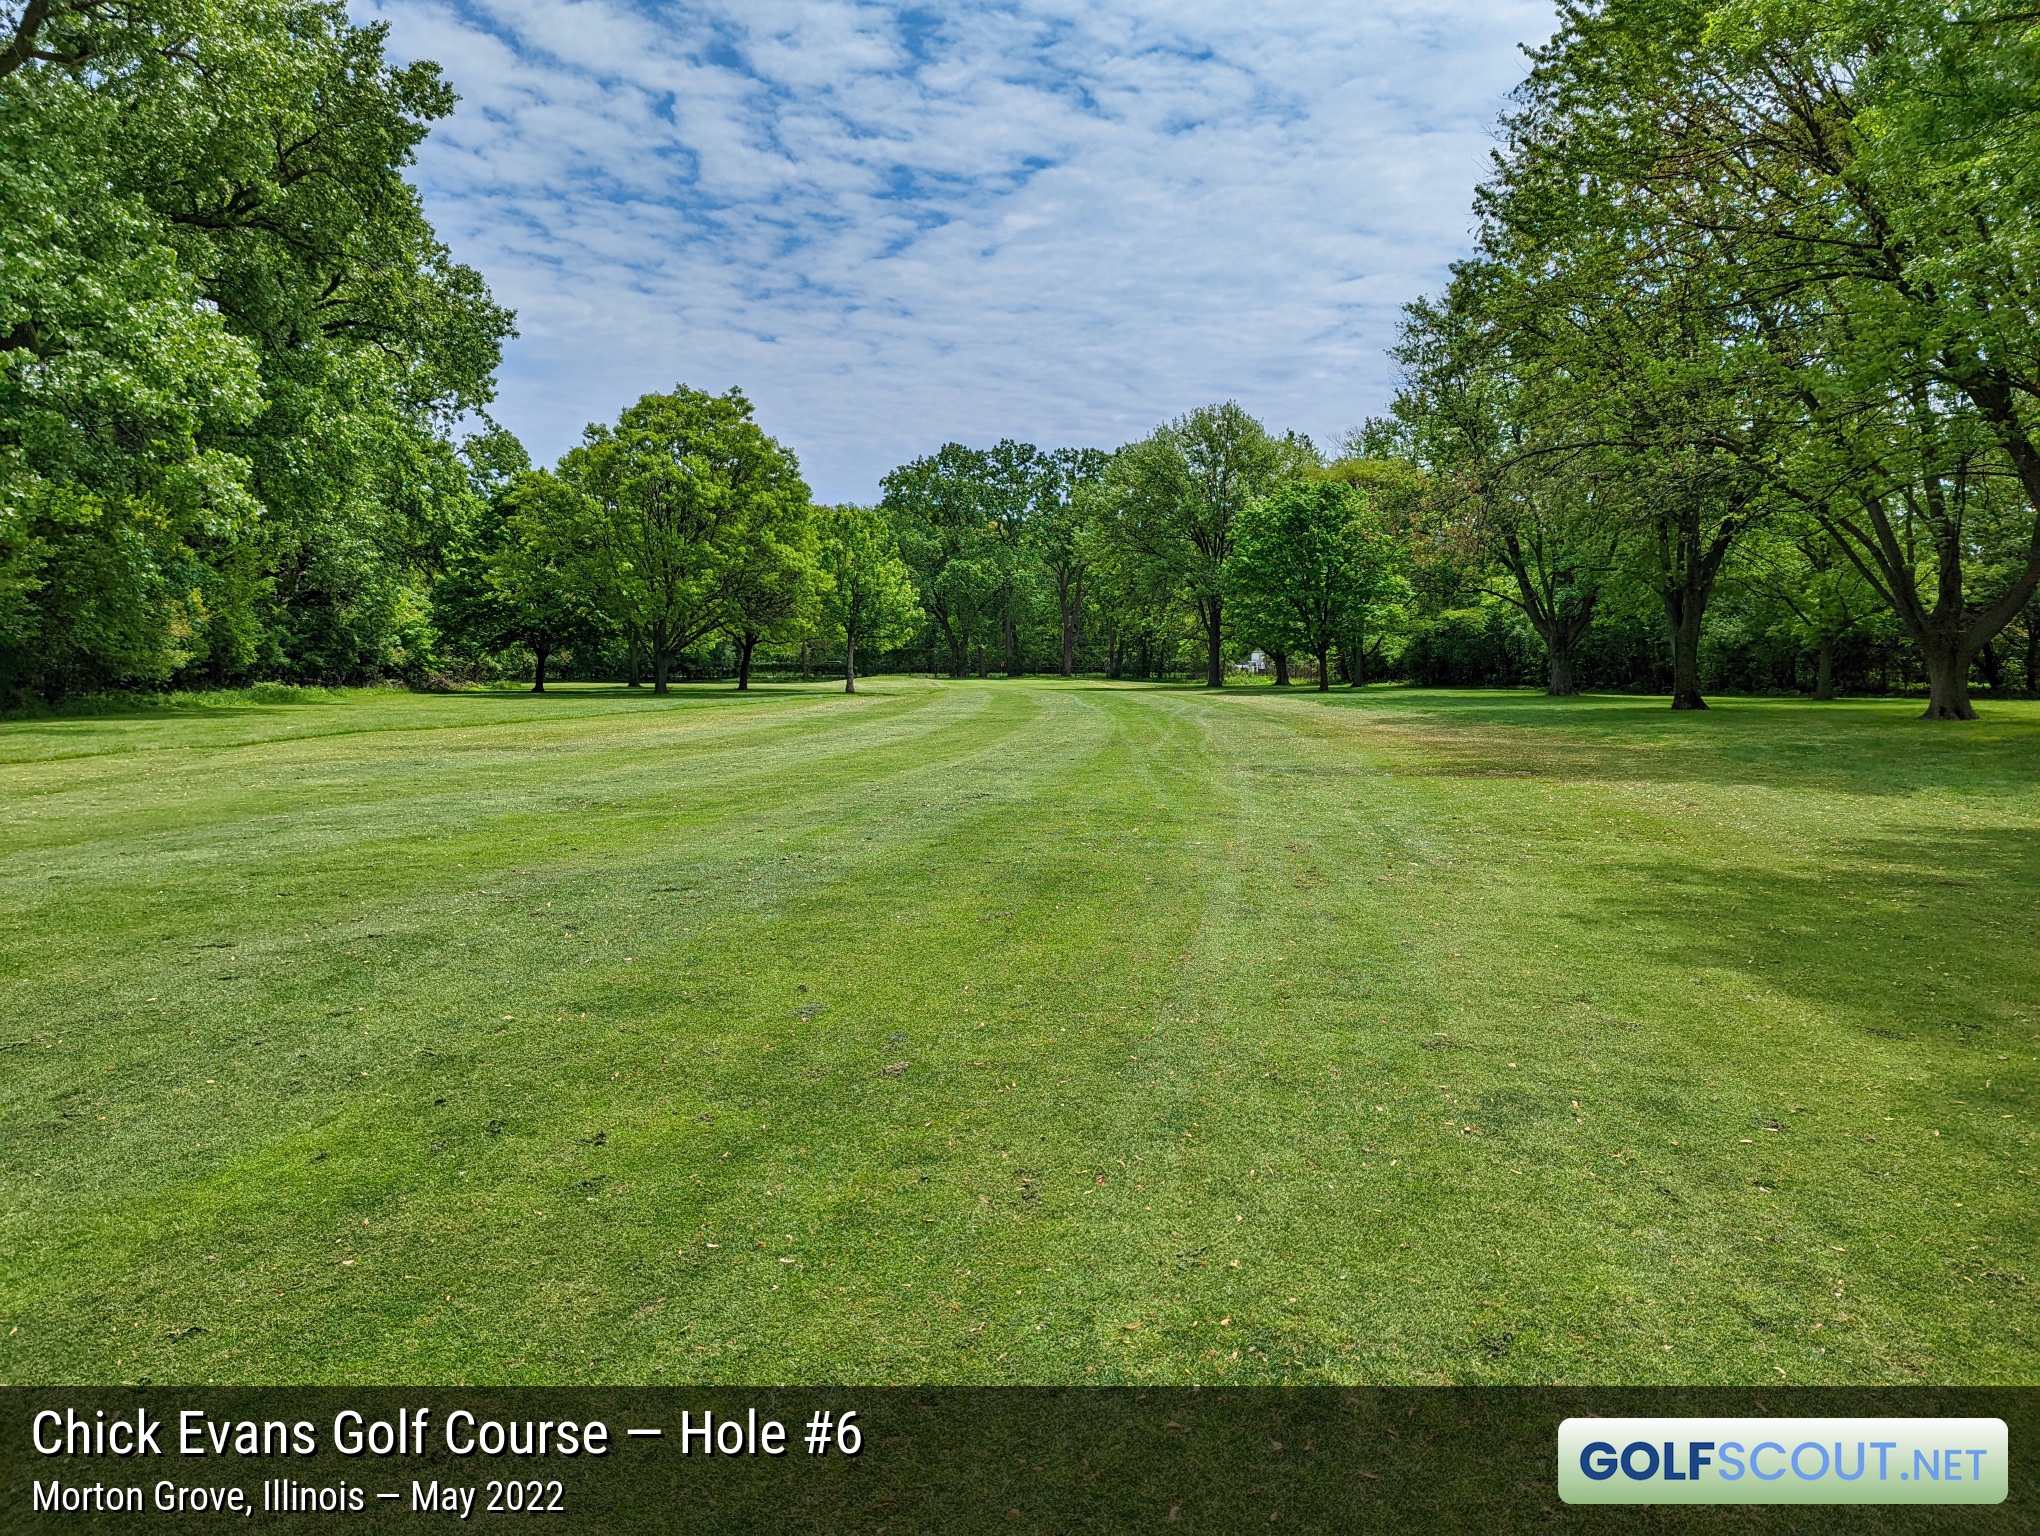 Photo of hole #6 at Chick Evans Golf Course in Morton Grove, Illinois. 